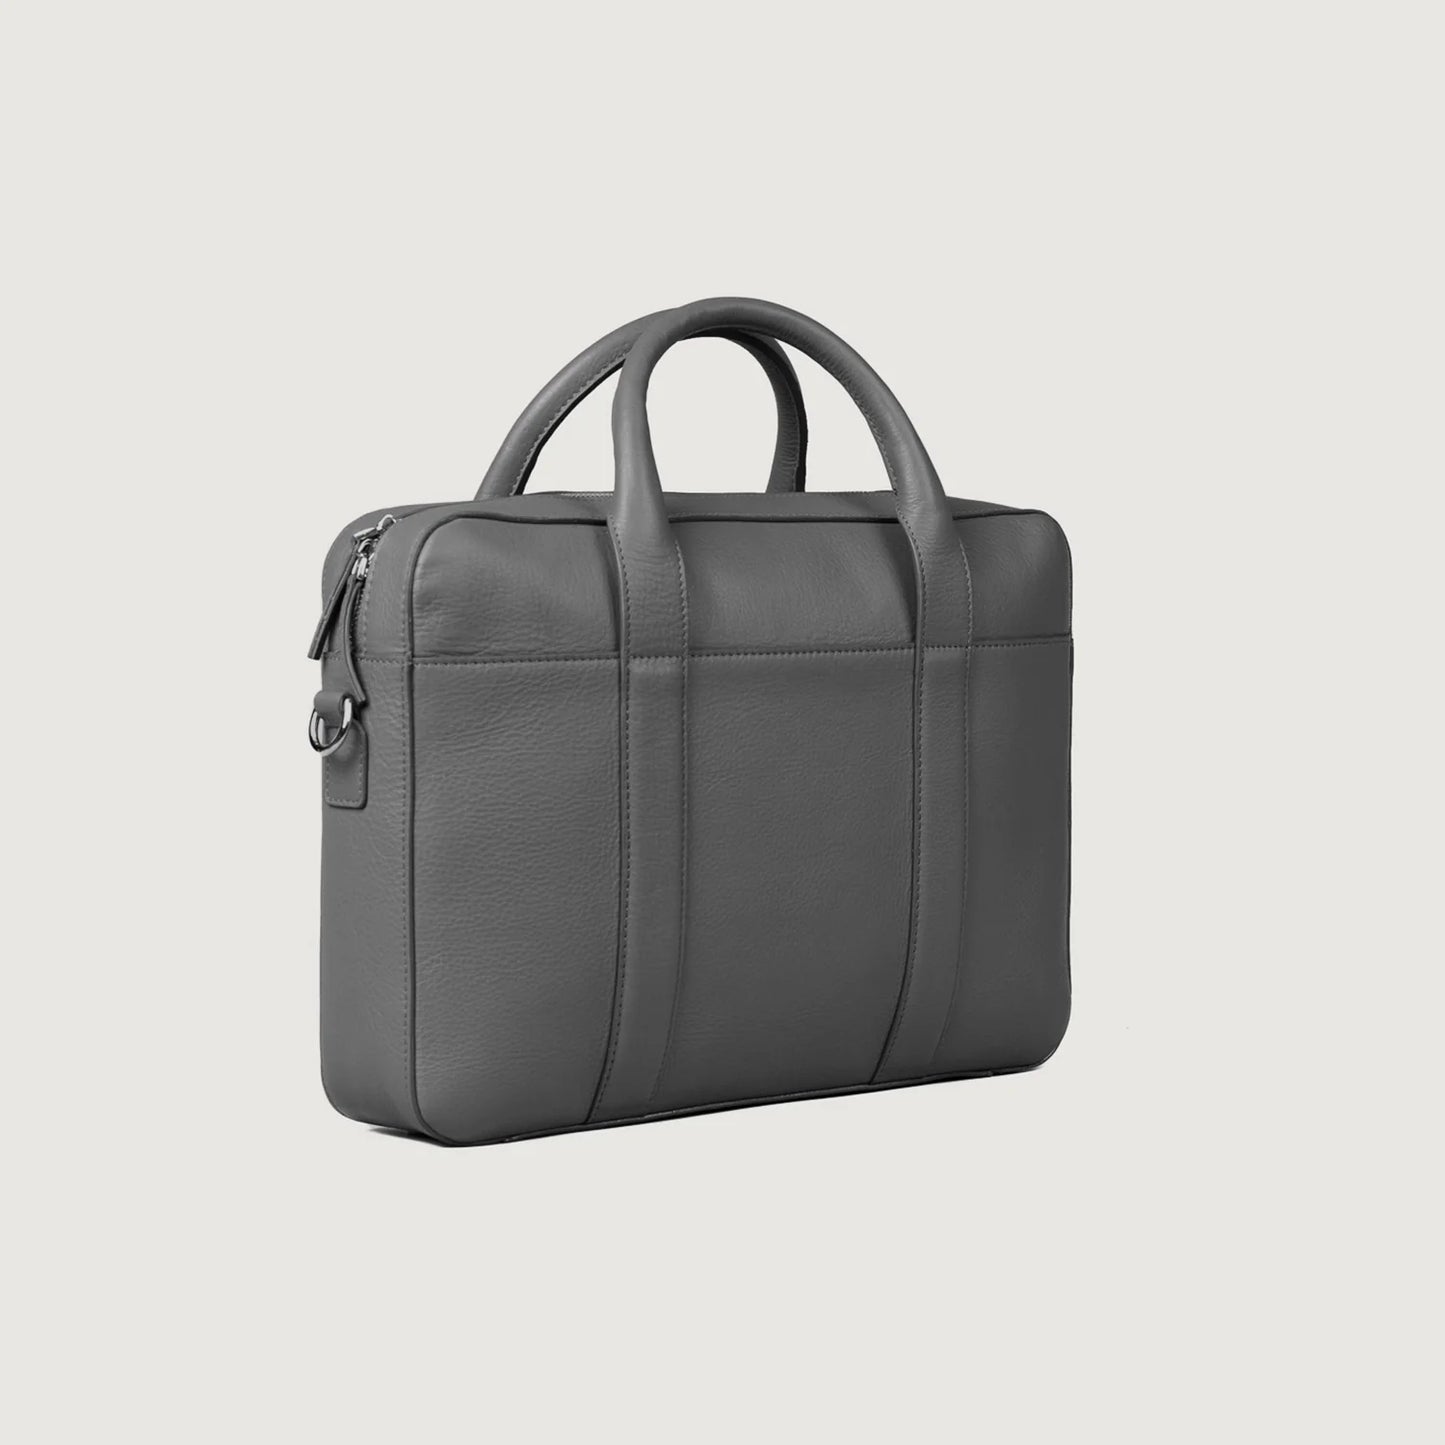 The Captain Grey Leather Briefcase